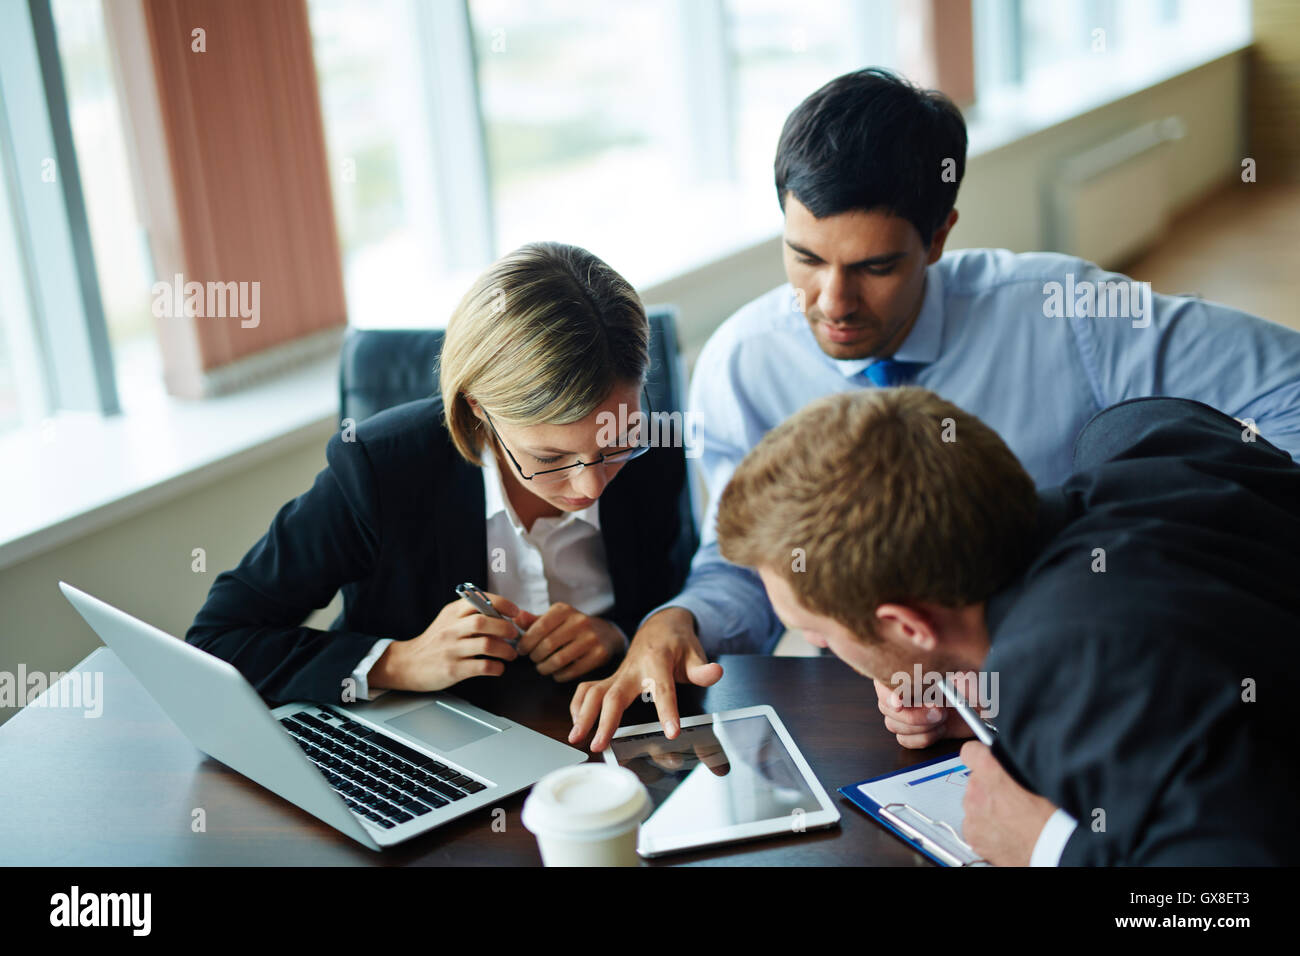 Using touchpad at meeting Stock Photo